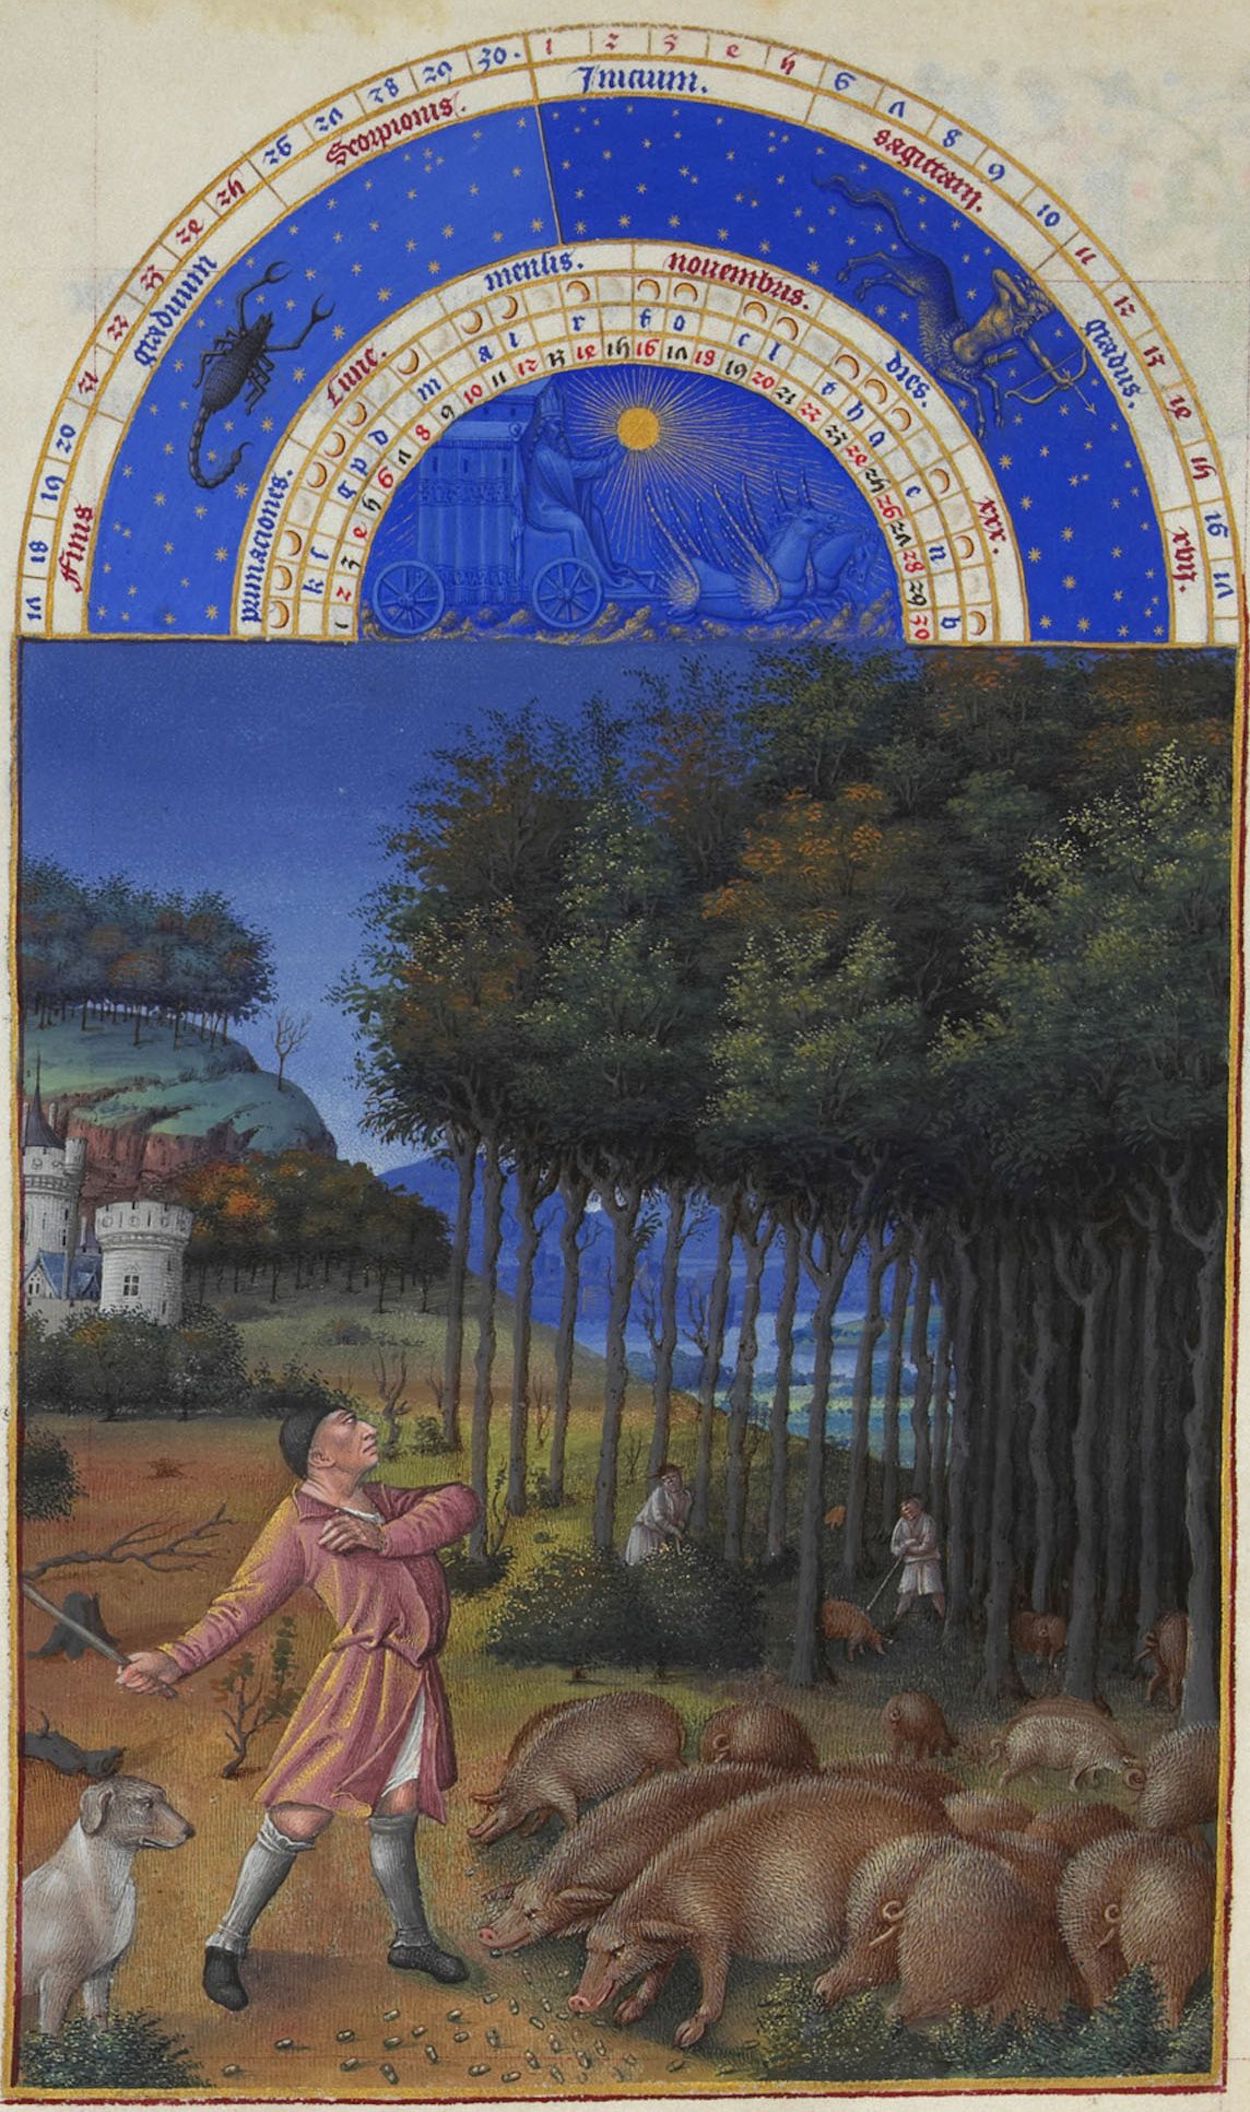 Très Riches Heures: November by The Limbourg Brothers - between 1485 and 1486 - 22.5 x 13.6 cm 